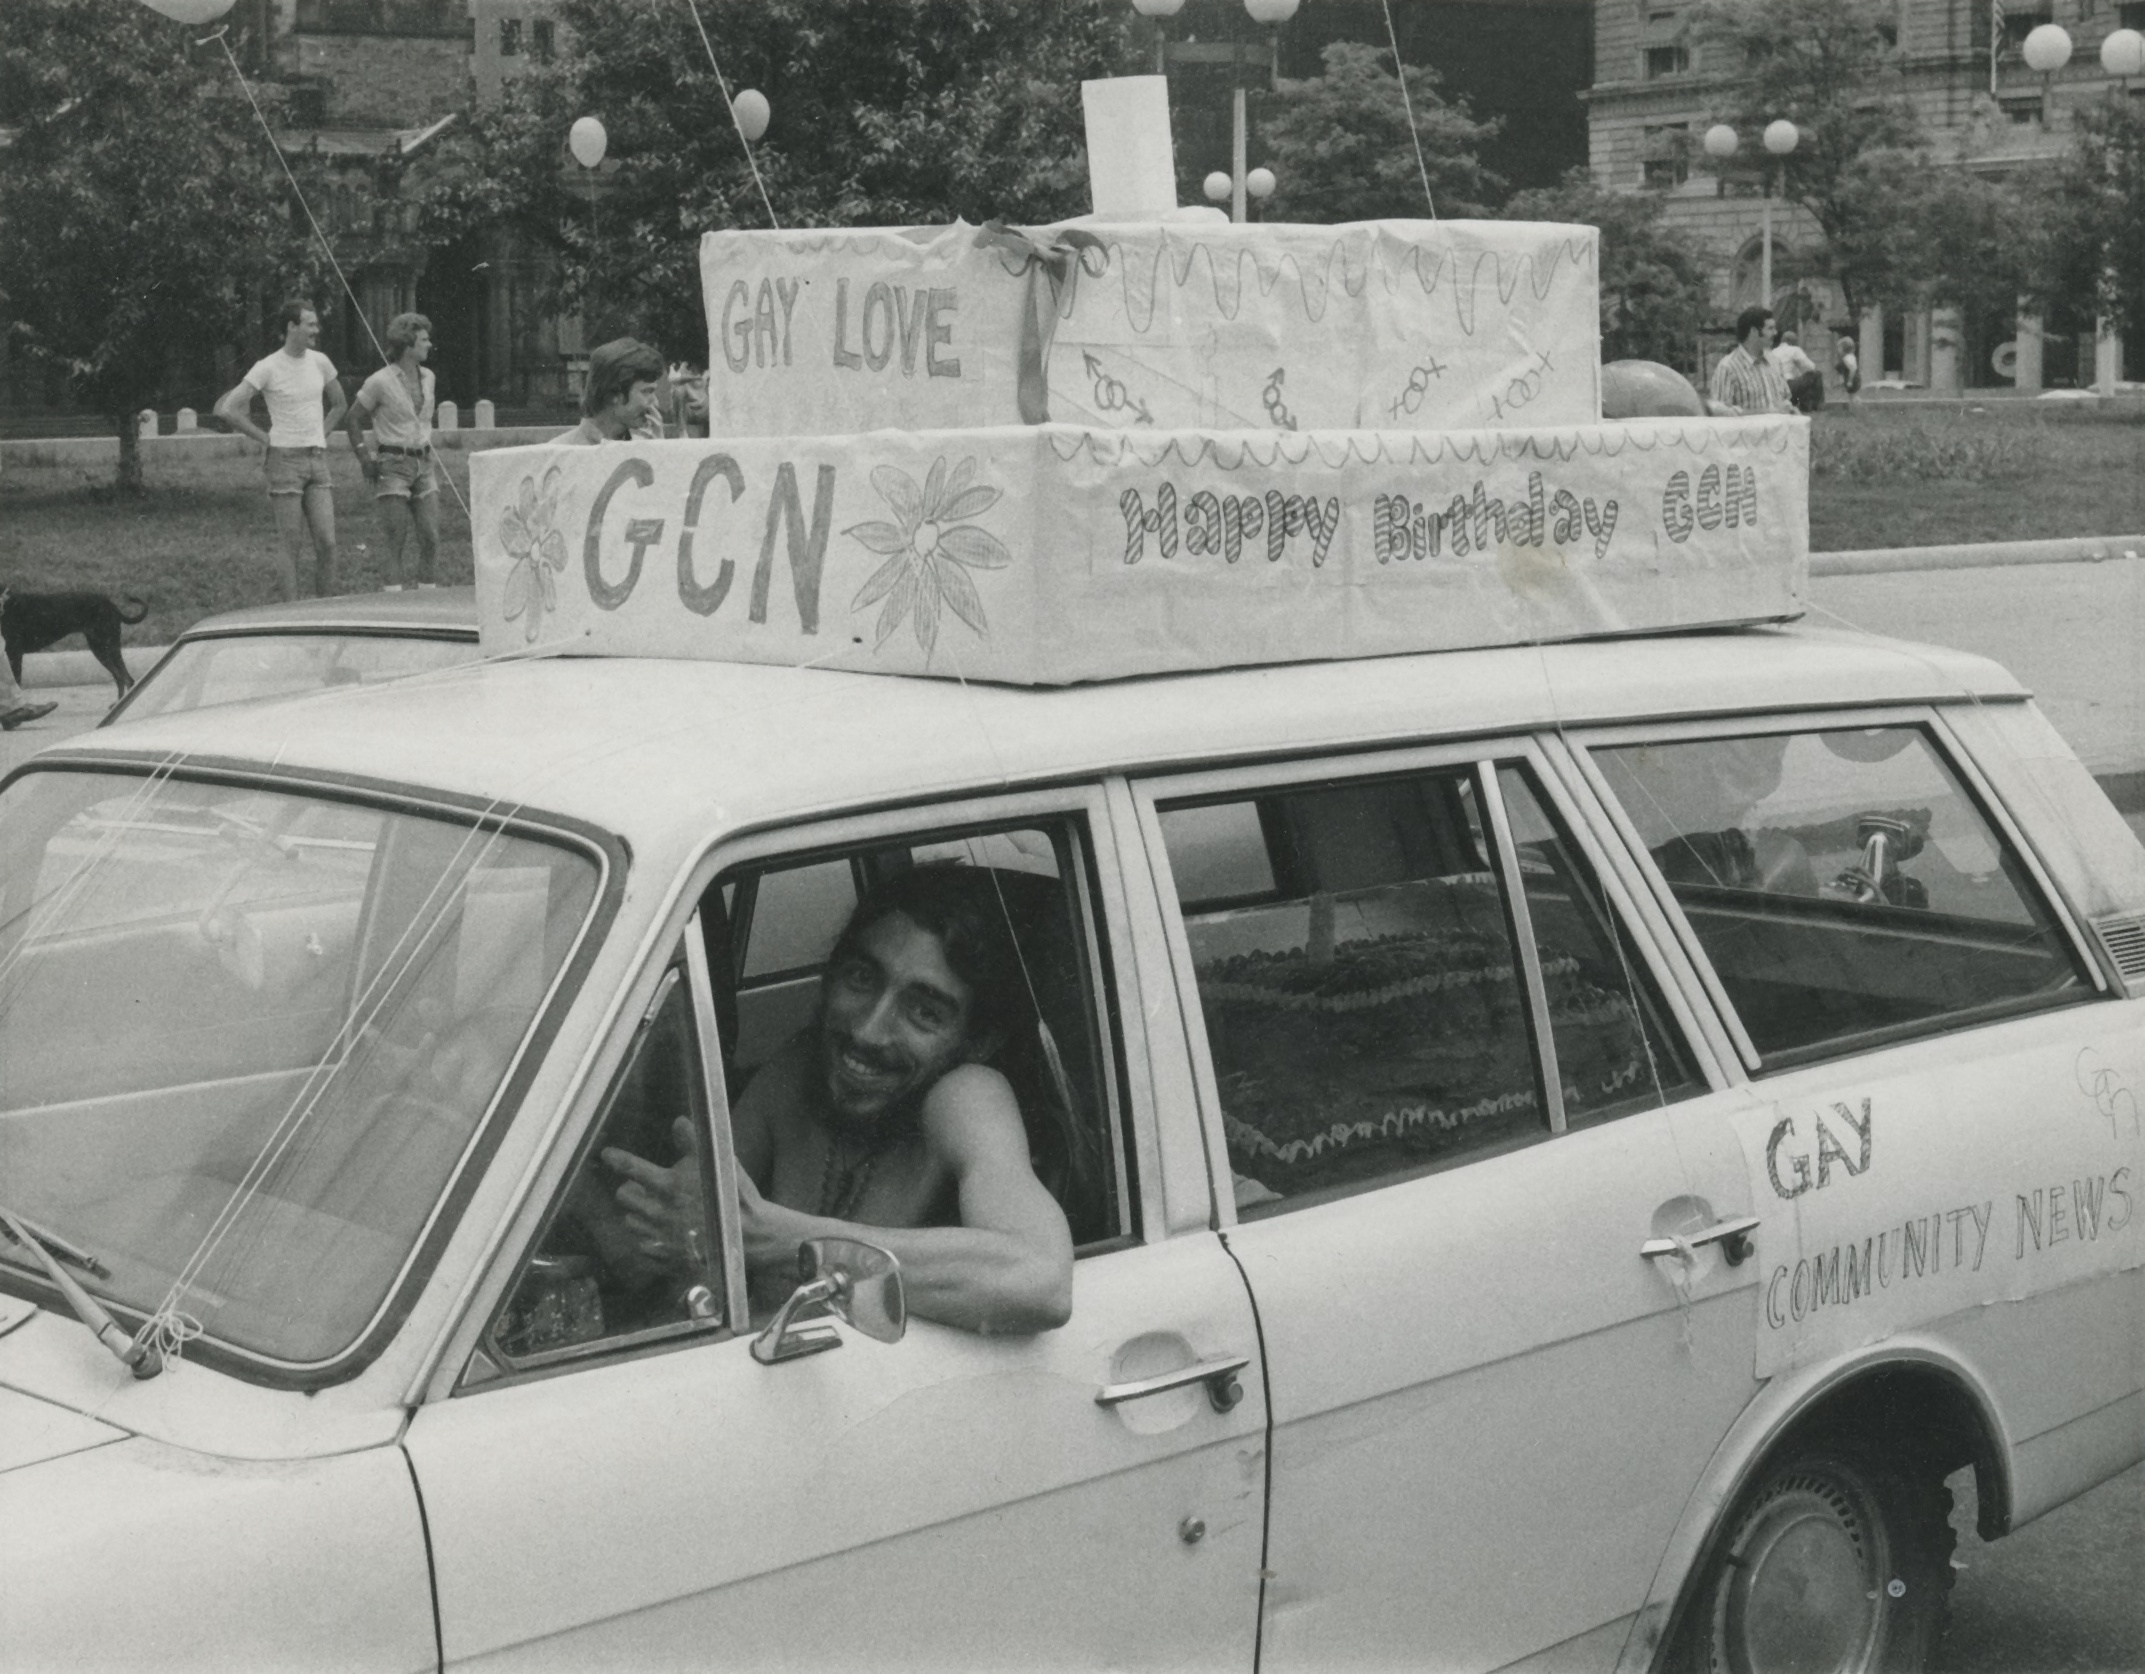 GCN Office Manager Ron Arruda driving GCN's first birthday cake in the Pride parade, June 1974